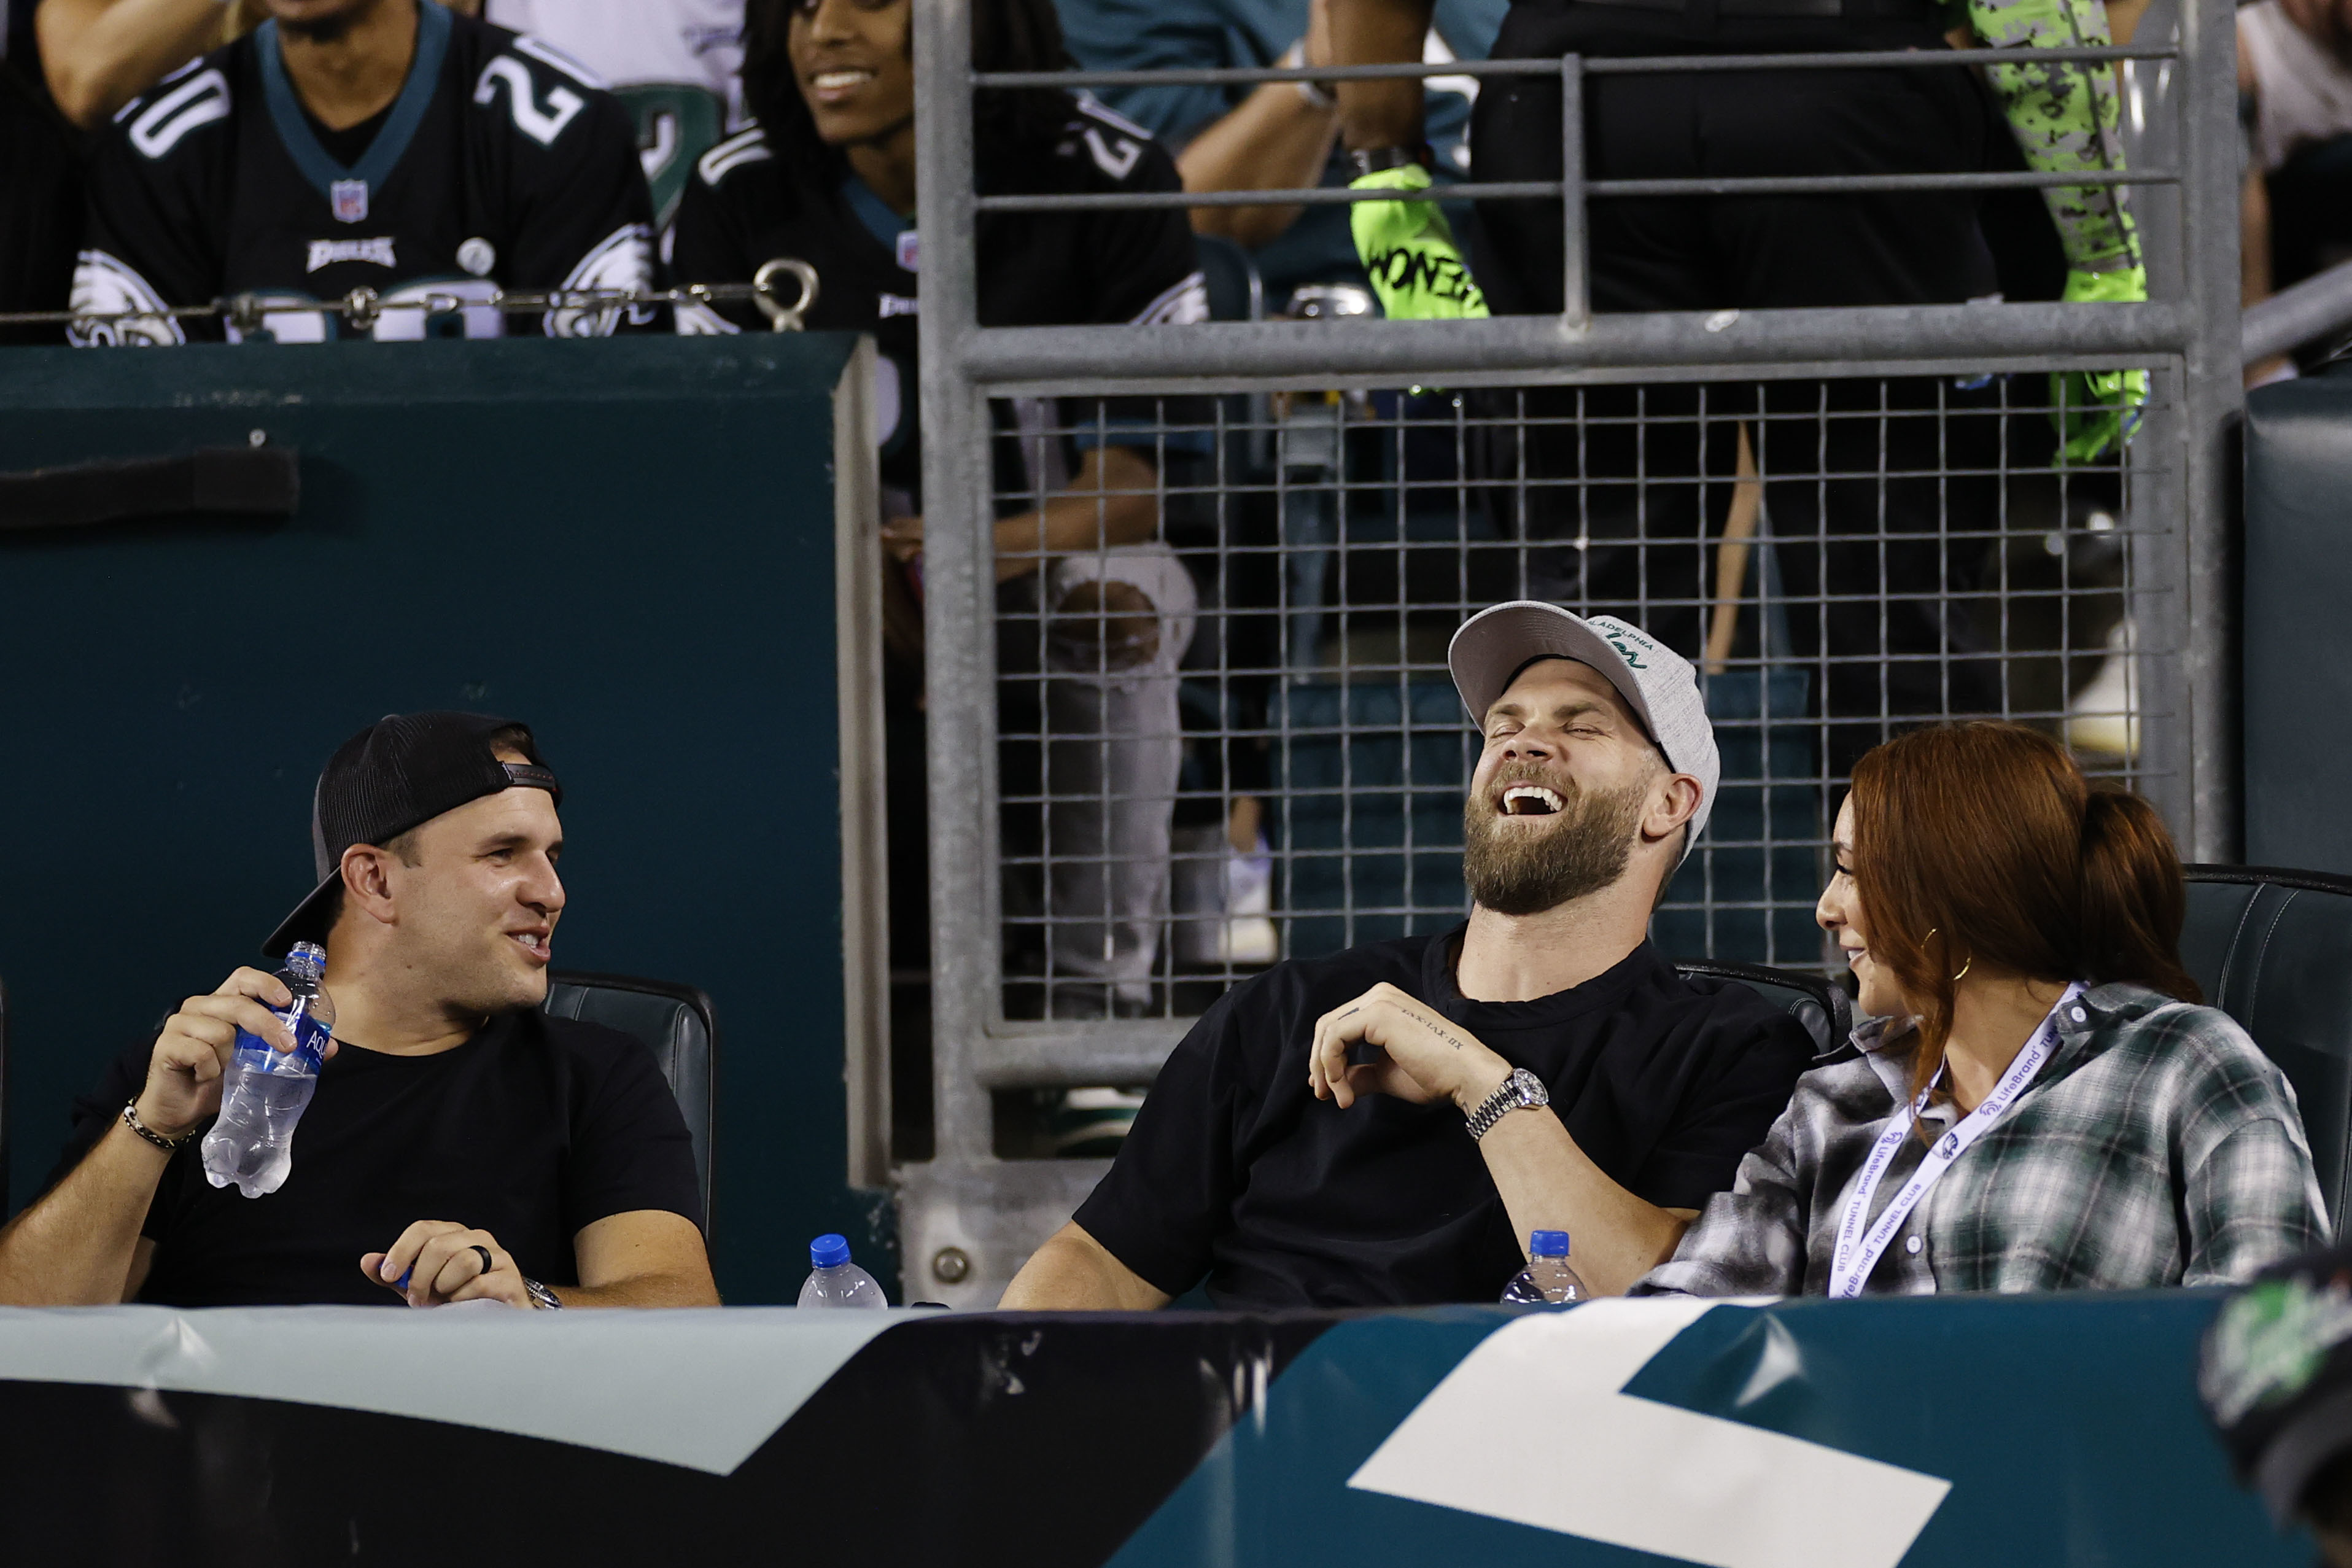 Phillies enjoyed rare chance to attend Eagles game